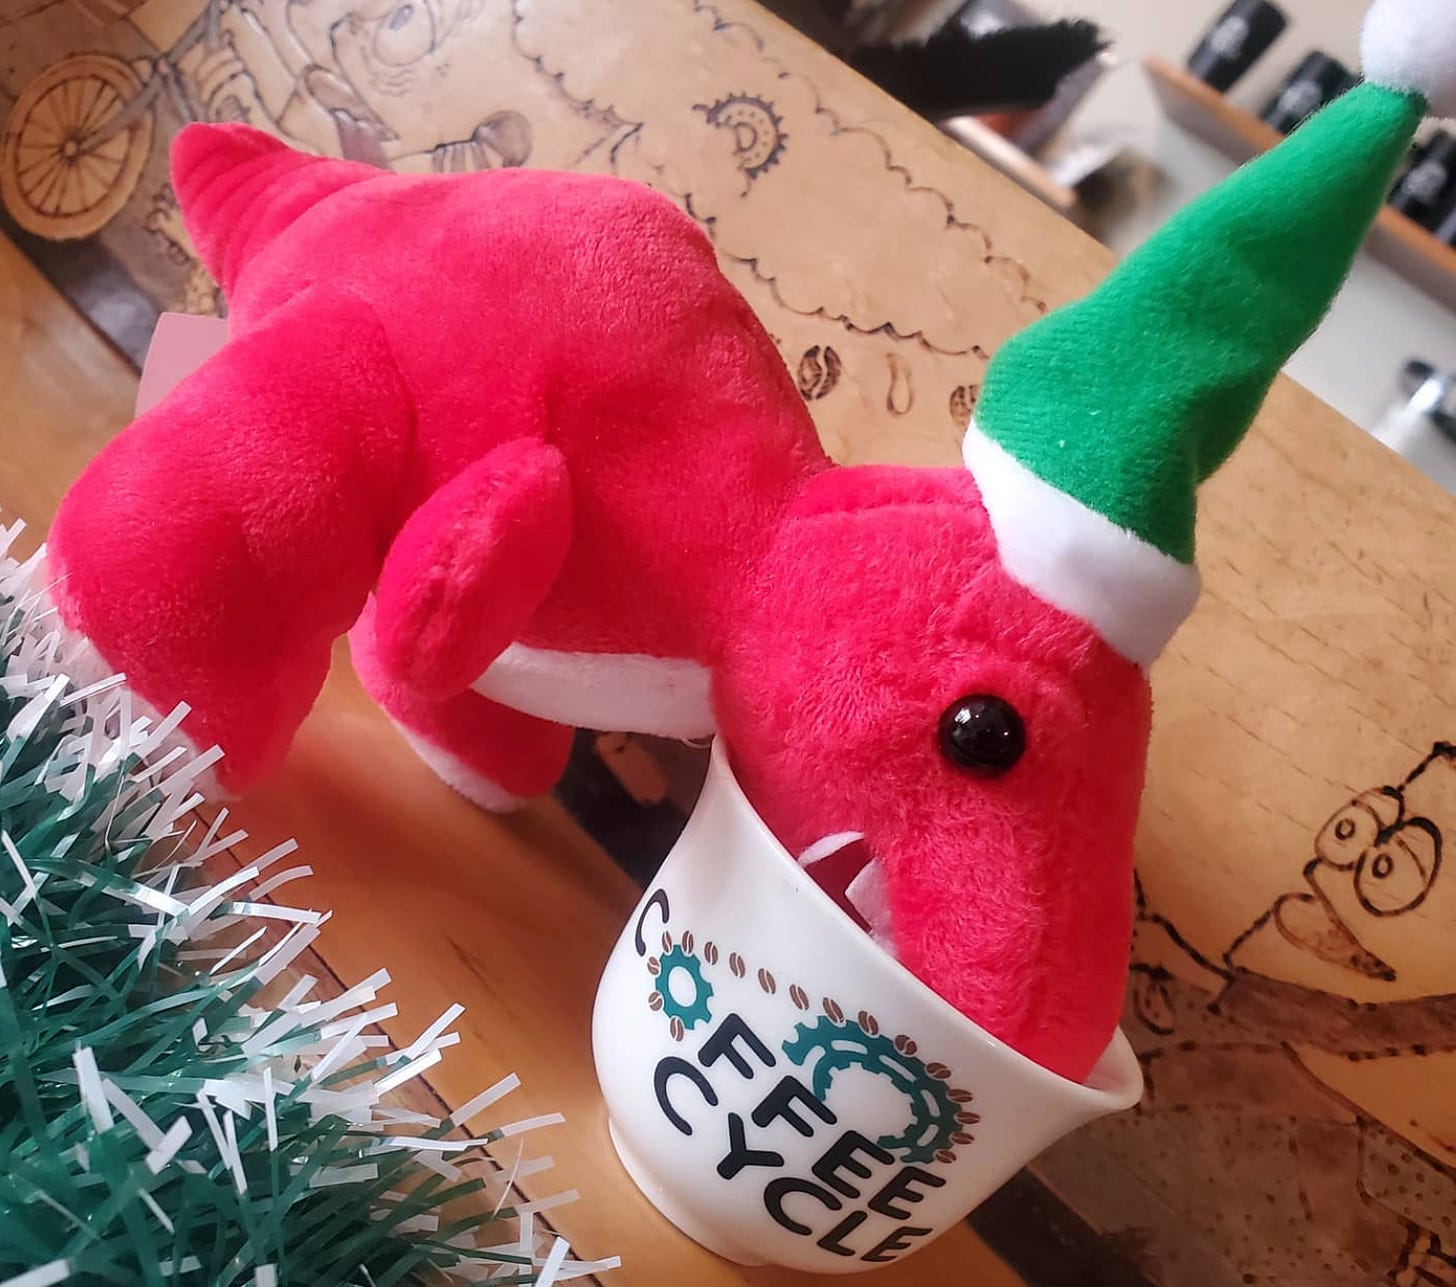 A red stuffed tyrannosaurus rex wearing a green elf hat drinking out of a demitasse espresso cup with the Coffee Cycle cafe logo on it. 